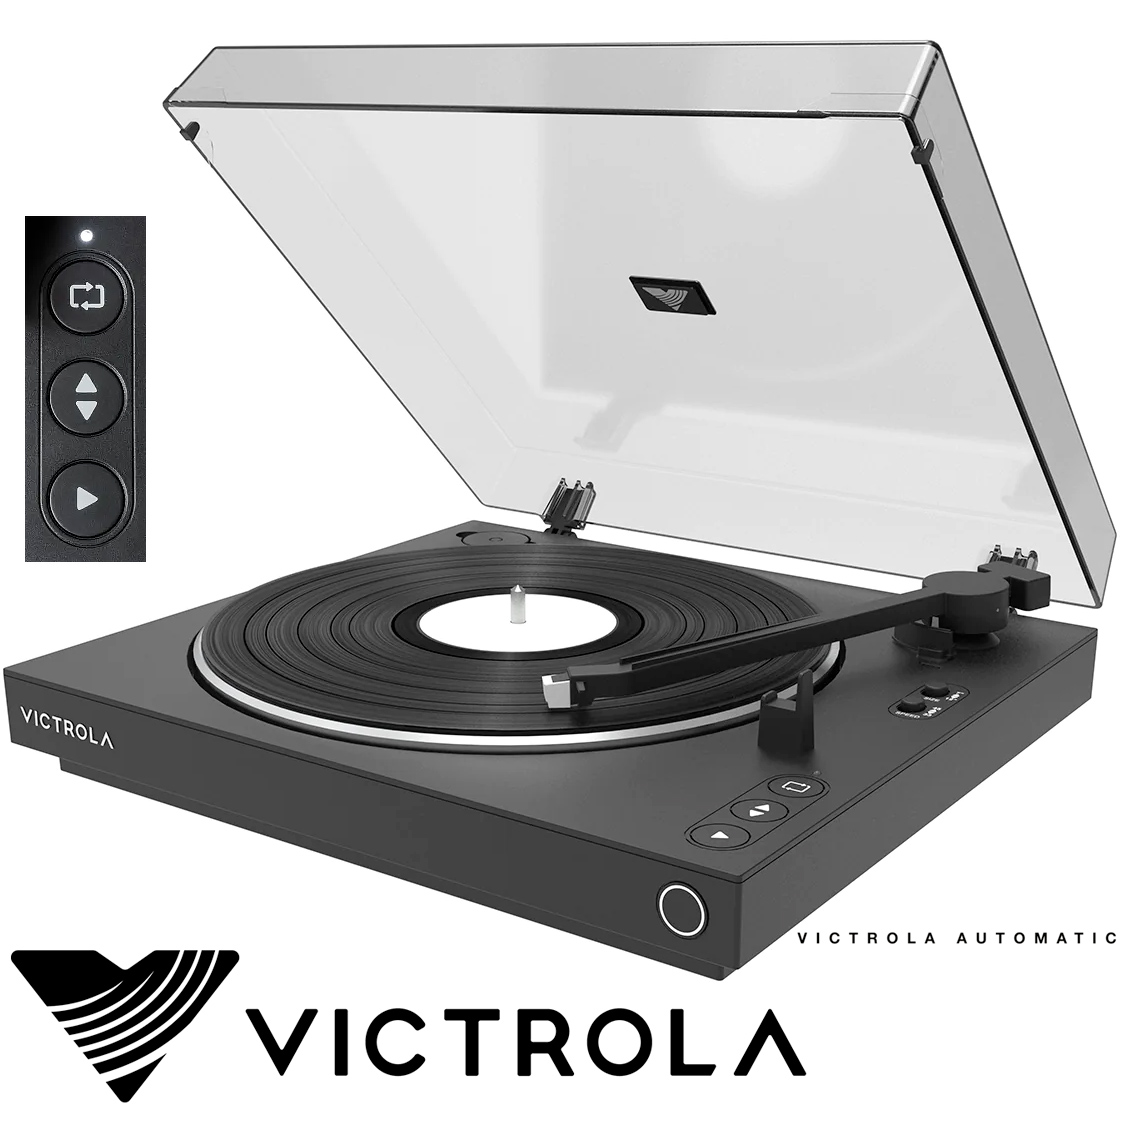 Toca-Discos Victrola Automatic Turntable